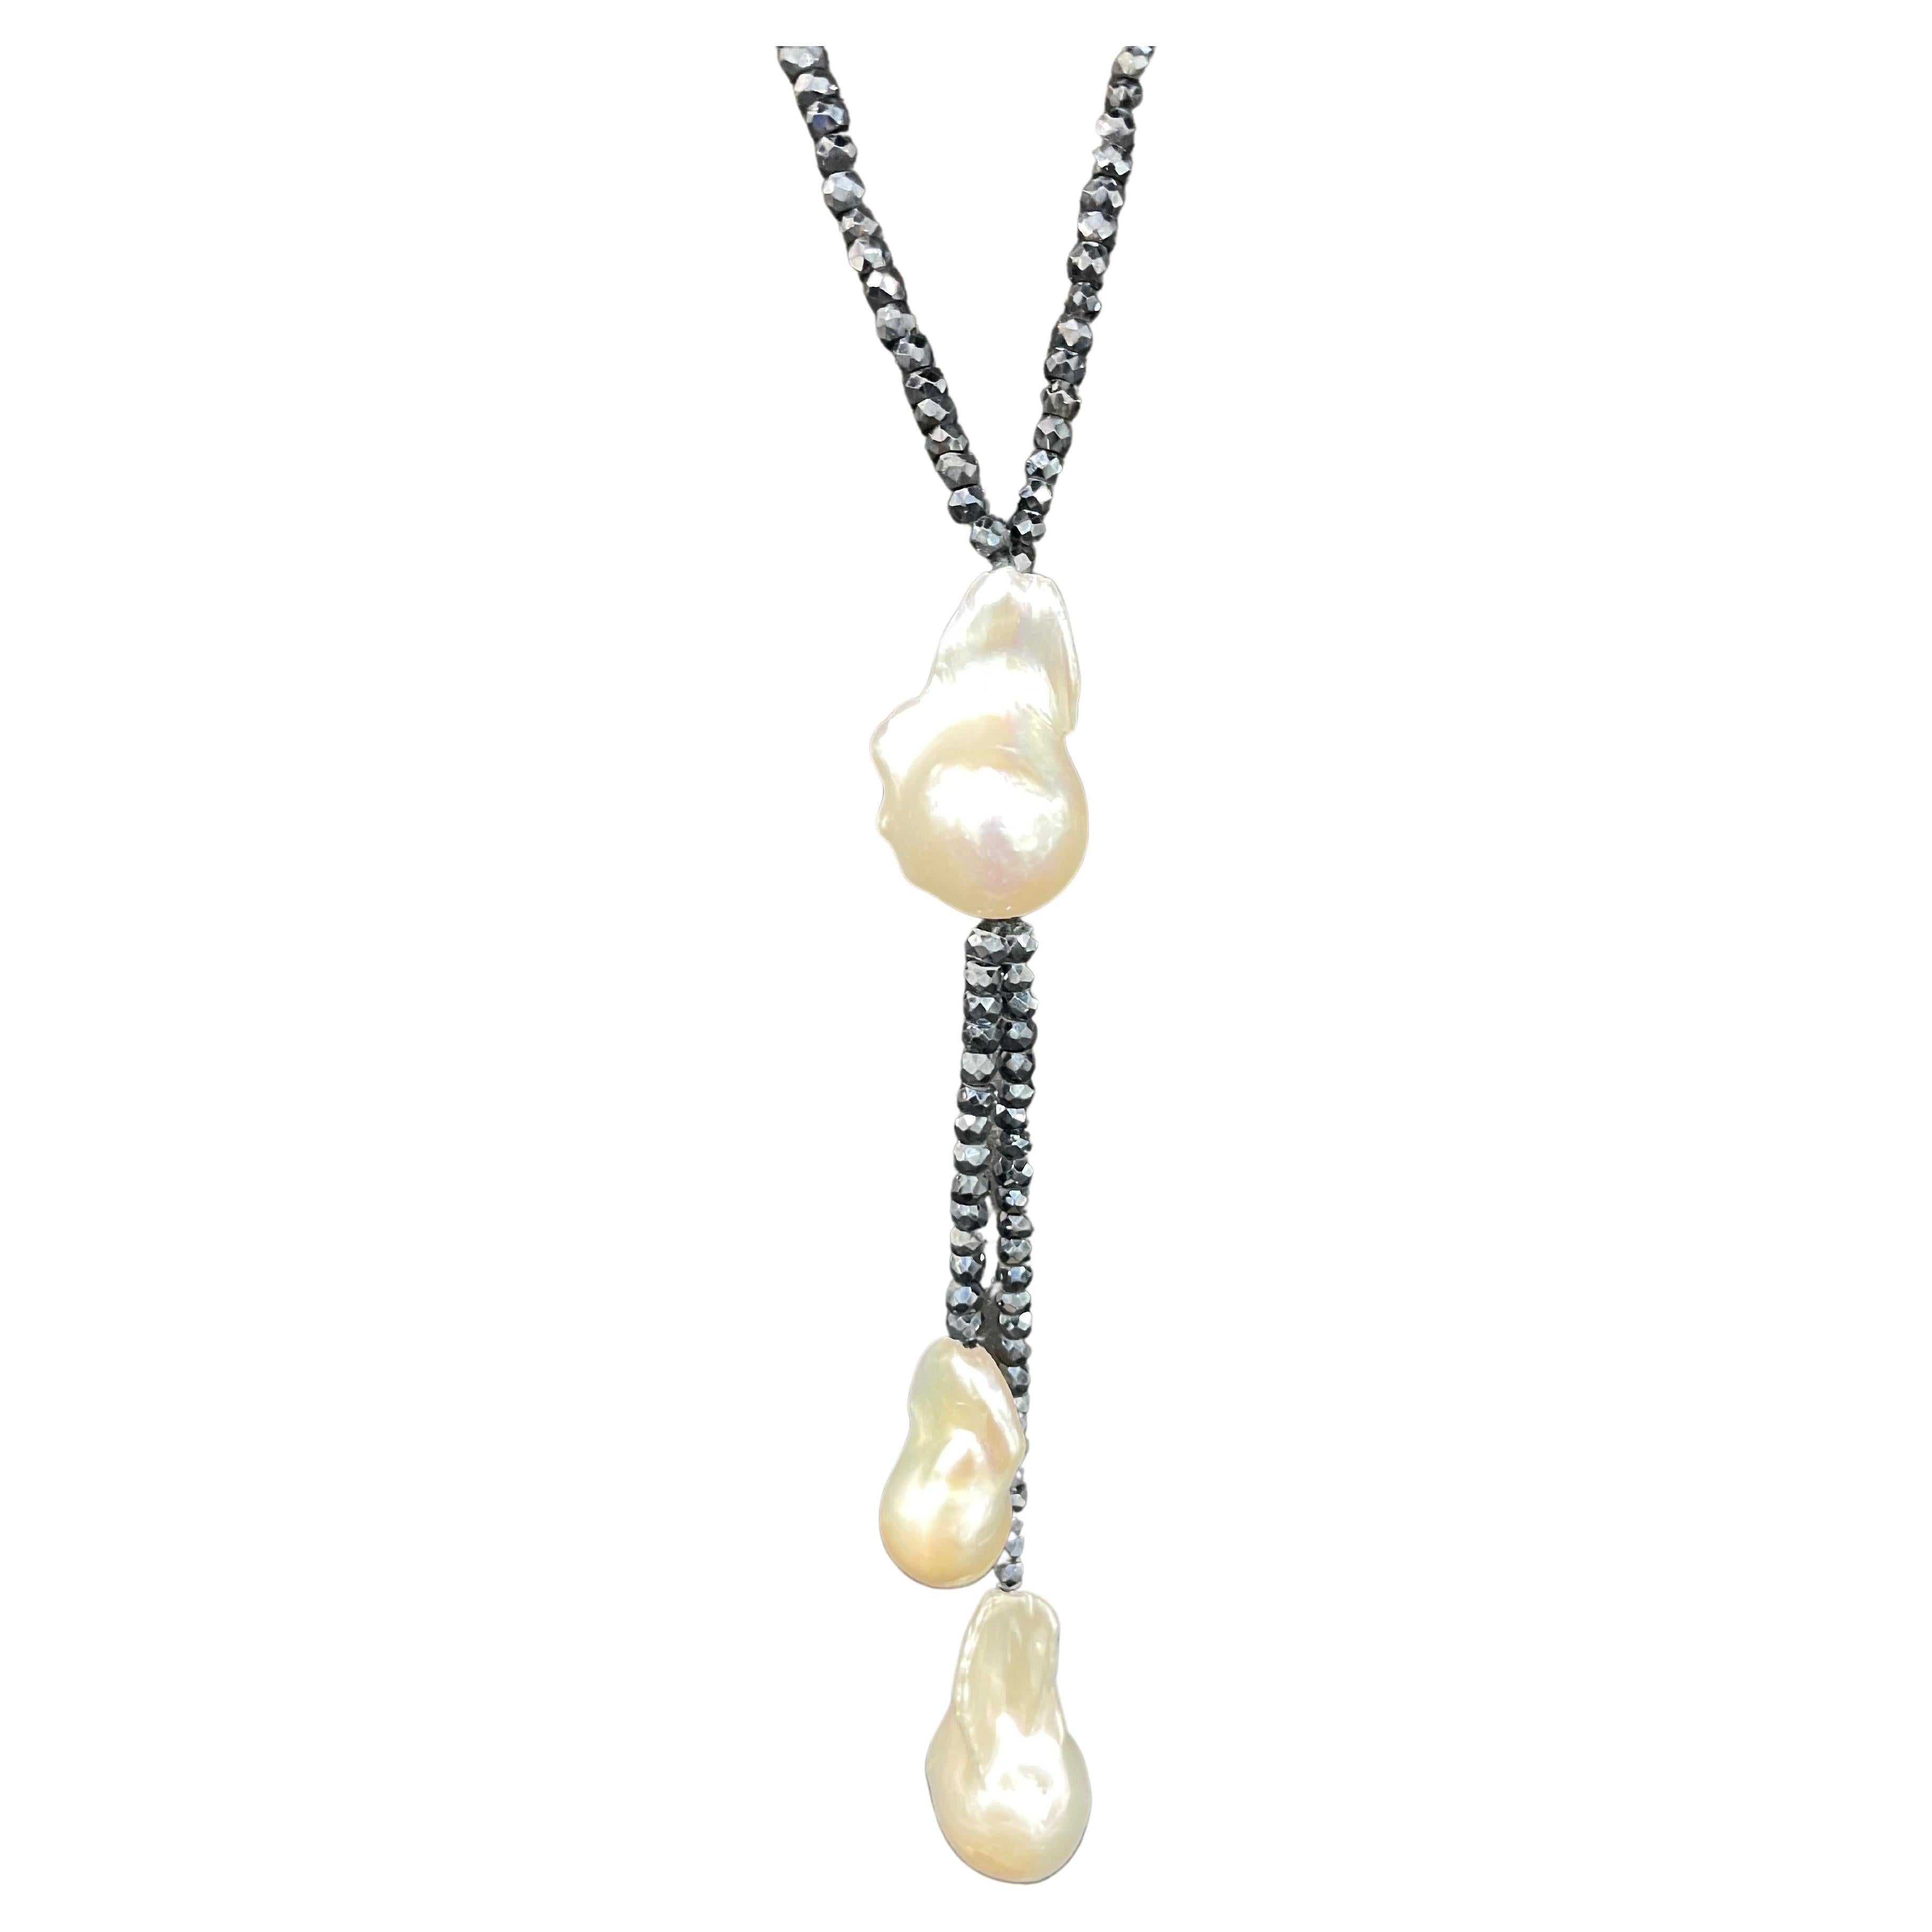 Long Mystic Spinel Baroque White Pearl Drop Necklace 36 Inches In New Condition For Sale In New York, NY